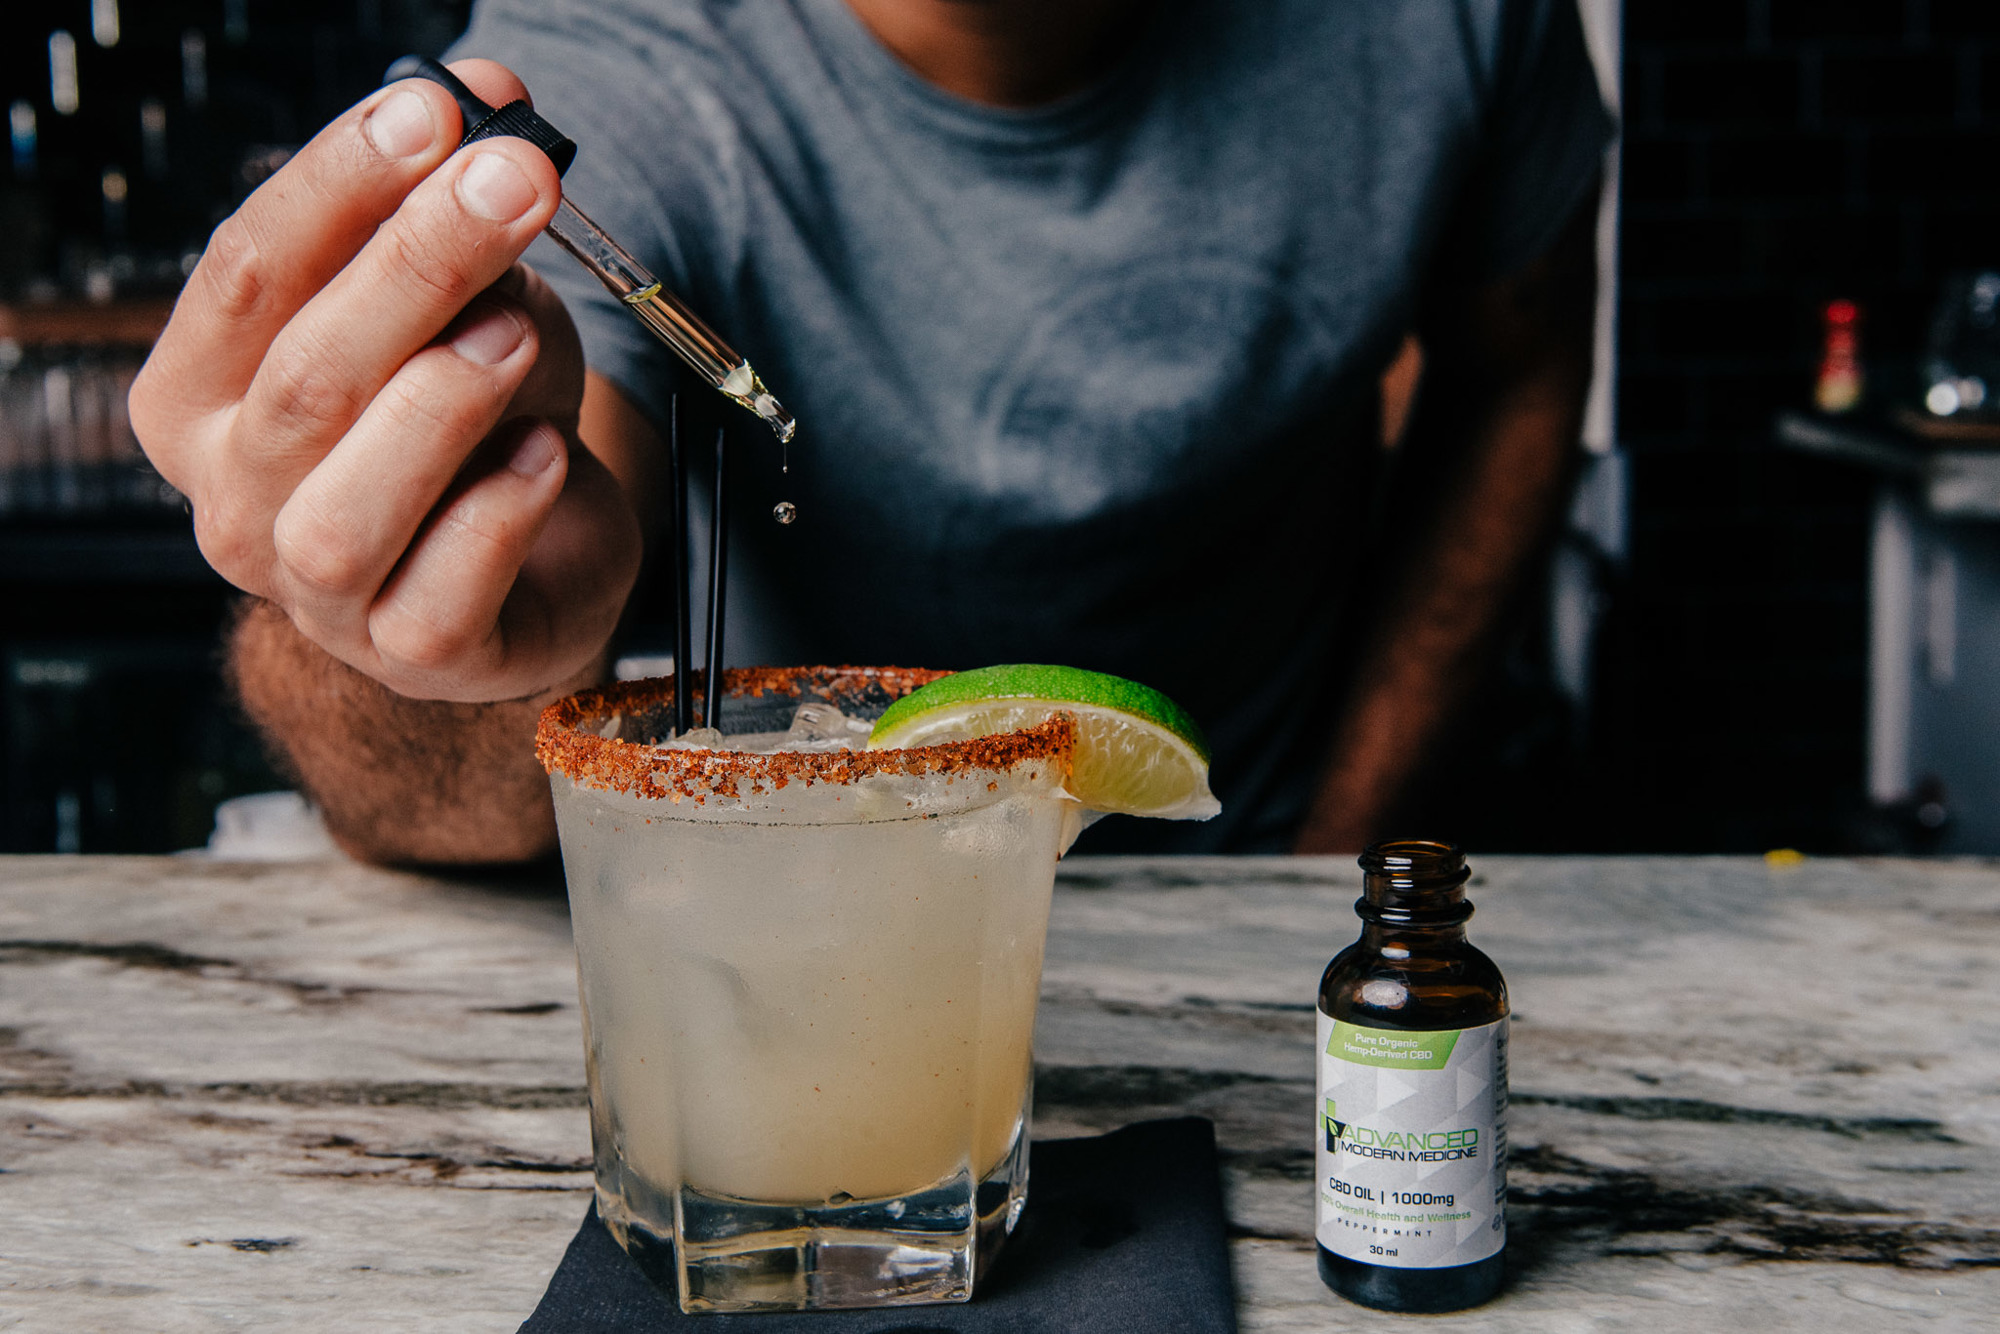 At Thee Tree House, customers can get cocktails made with CBD oil. Courtesy photo.